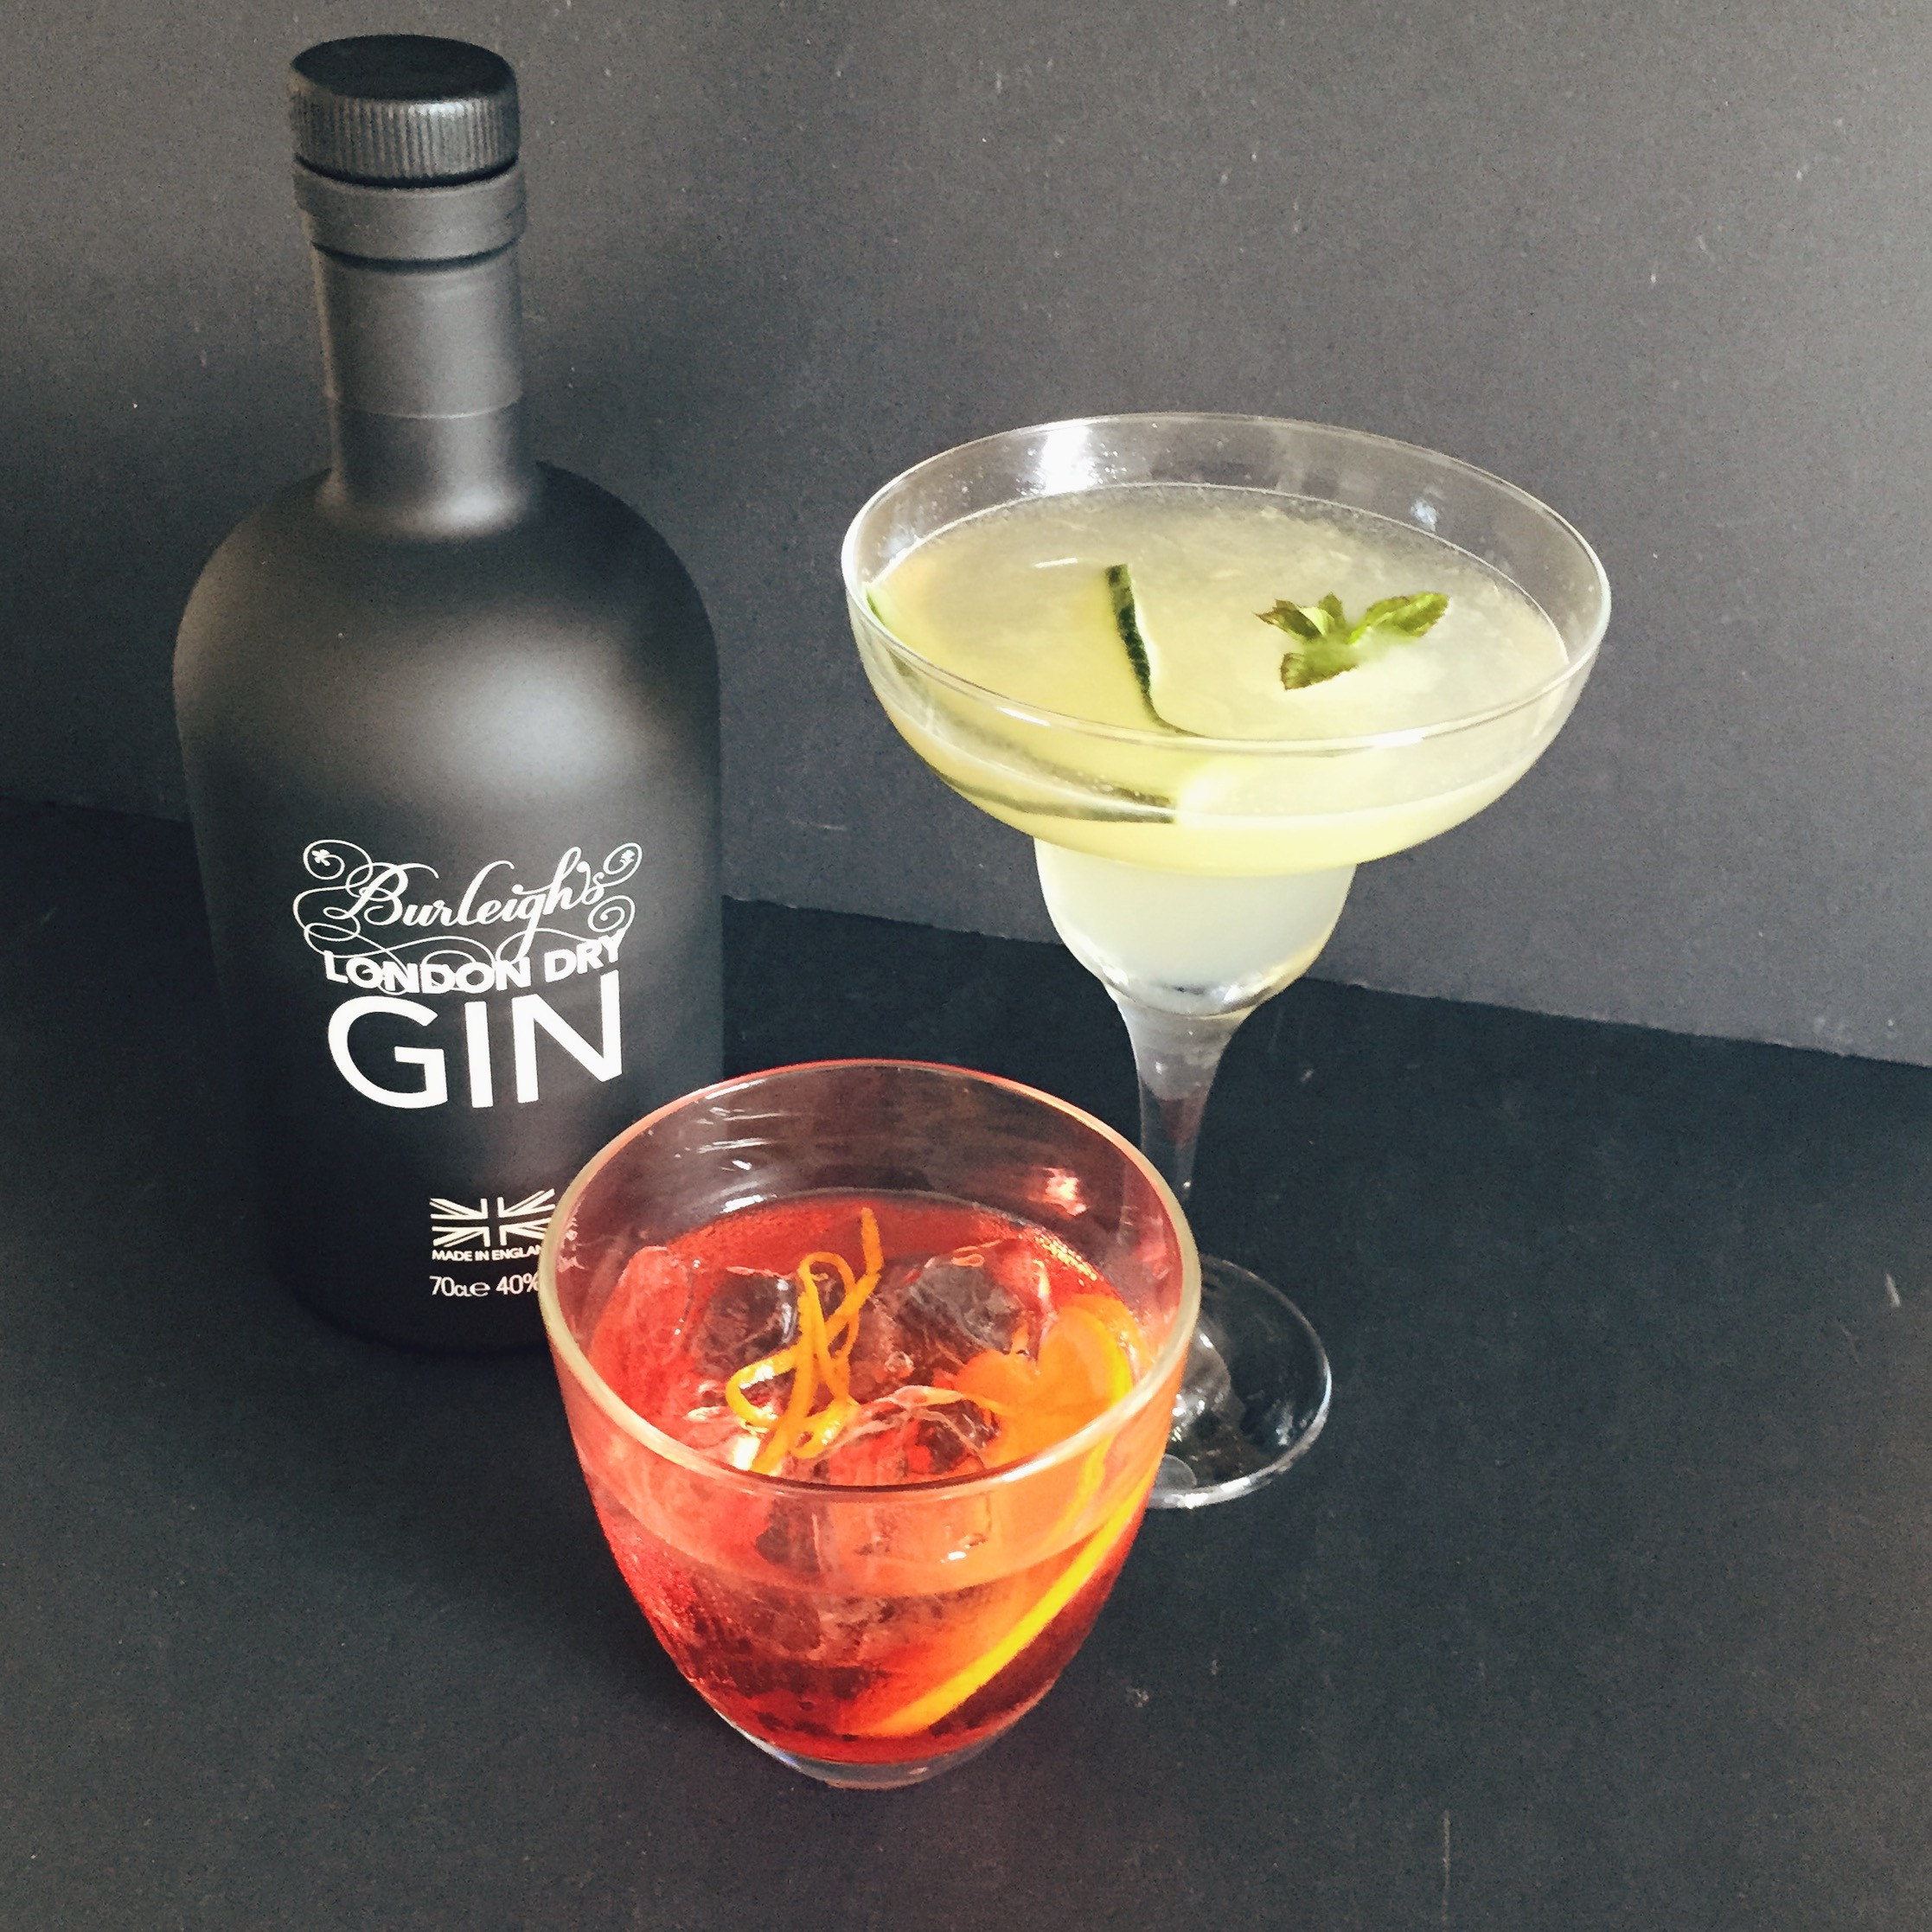 Gin Cocktails Drinks
 Cocktail Friday with Burleigh s Gin The Style Journal